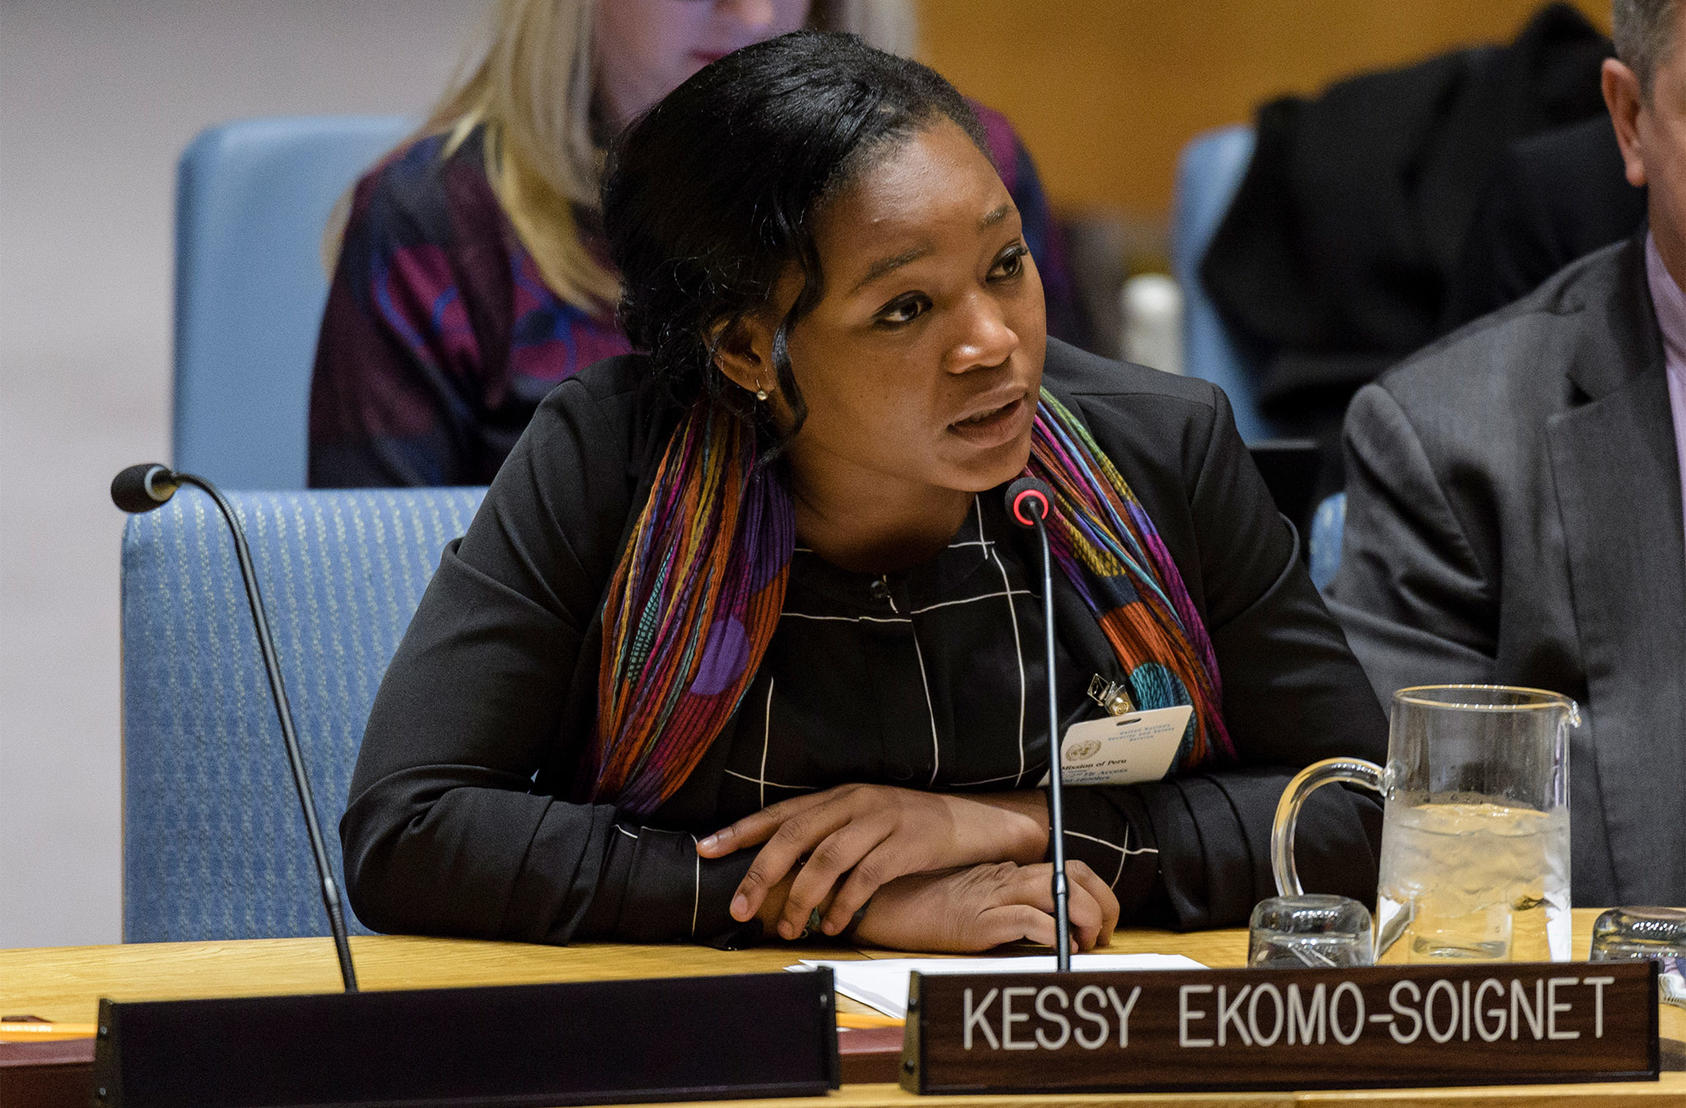 USIP Generation Change Fellow Ekomo-Soignet, who co-wrote this article, addresses a Security Council meeting on the maintenance of international peace and security, with a focus on youth, April 23, 2018. (UN Photo/Manuel Elias)